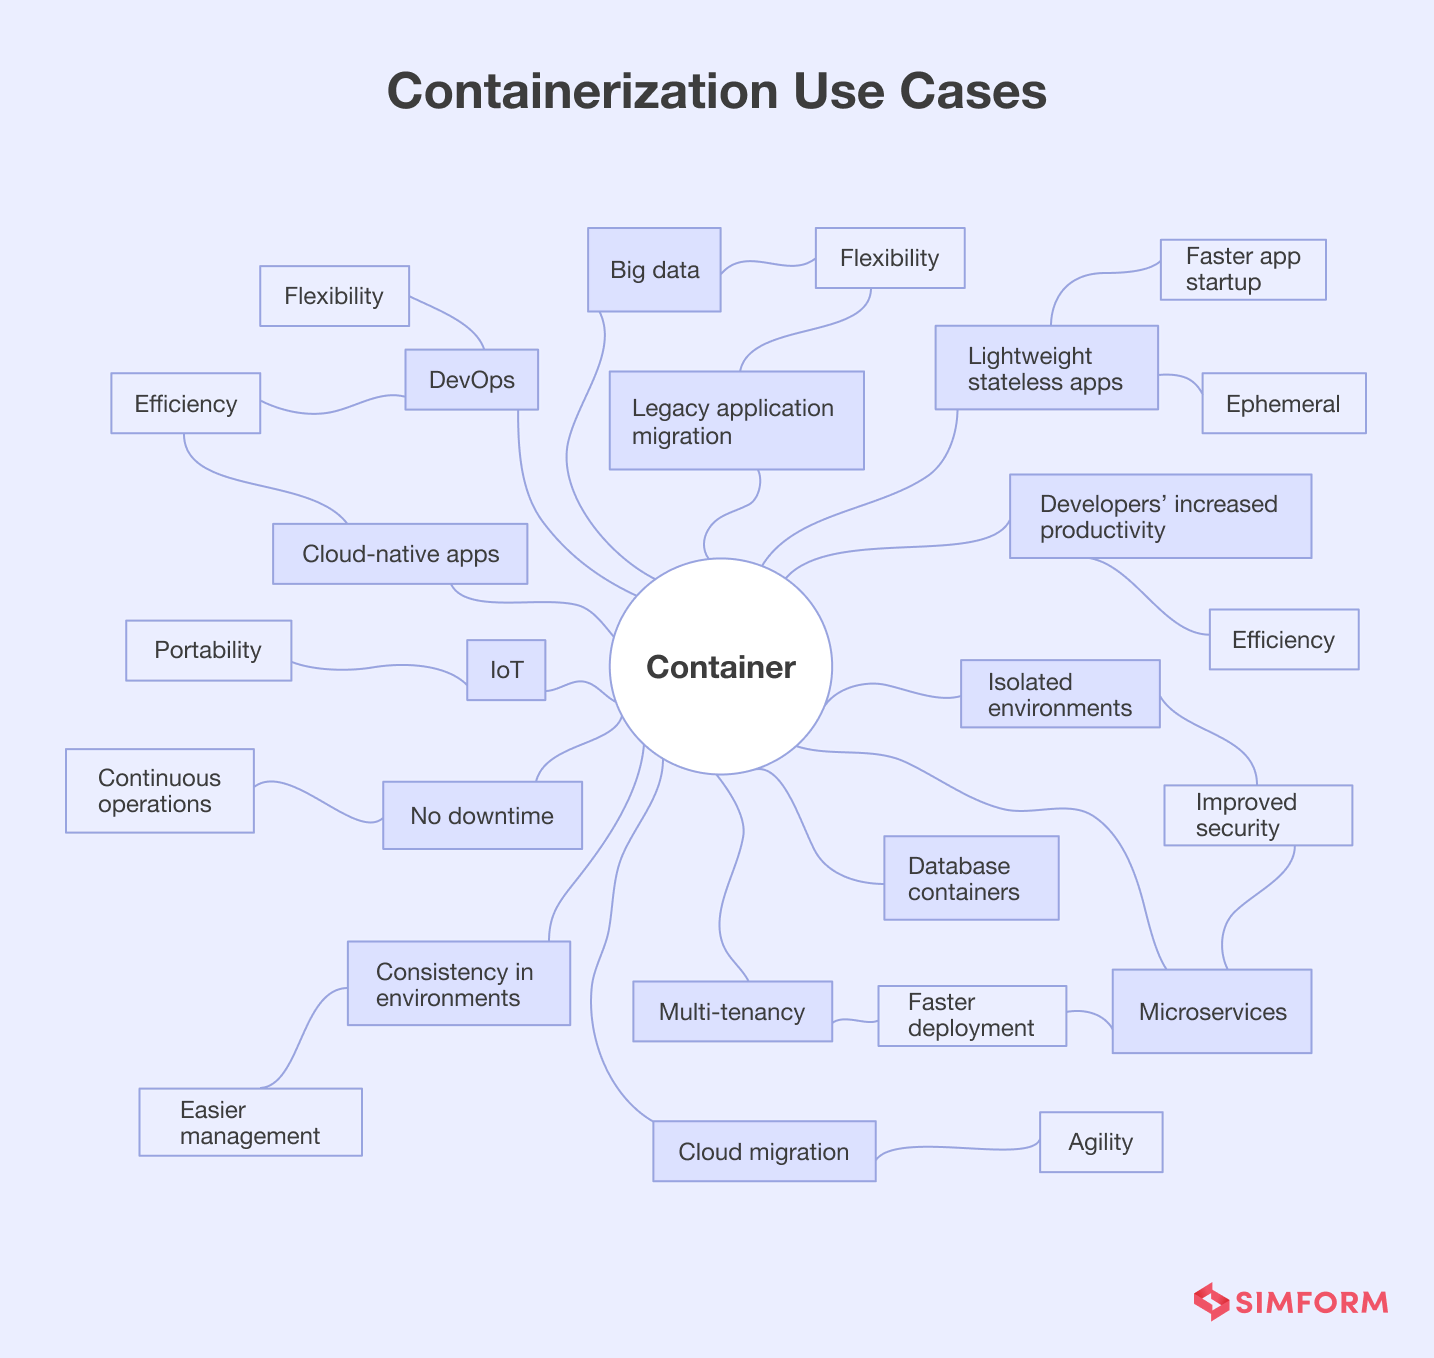 Container Use Cases With Benefits